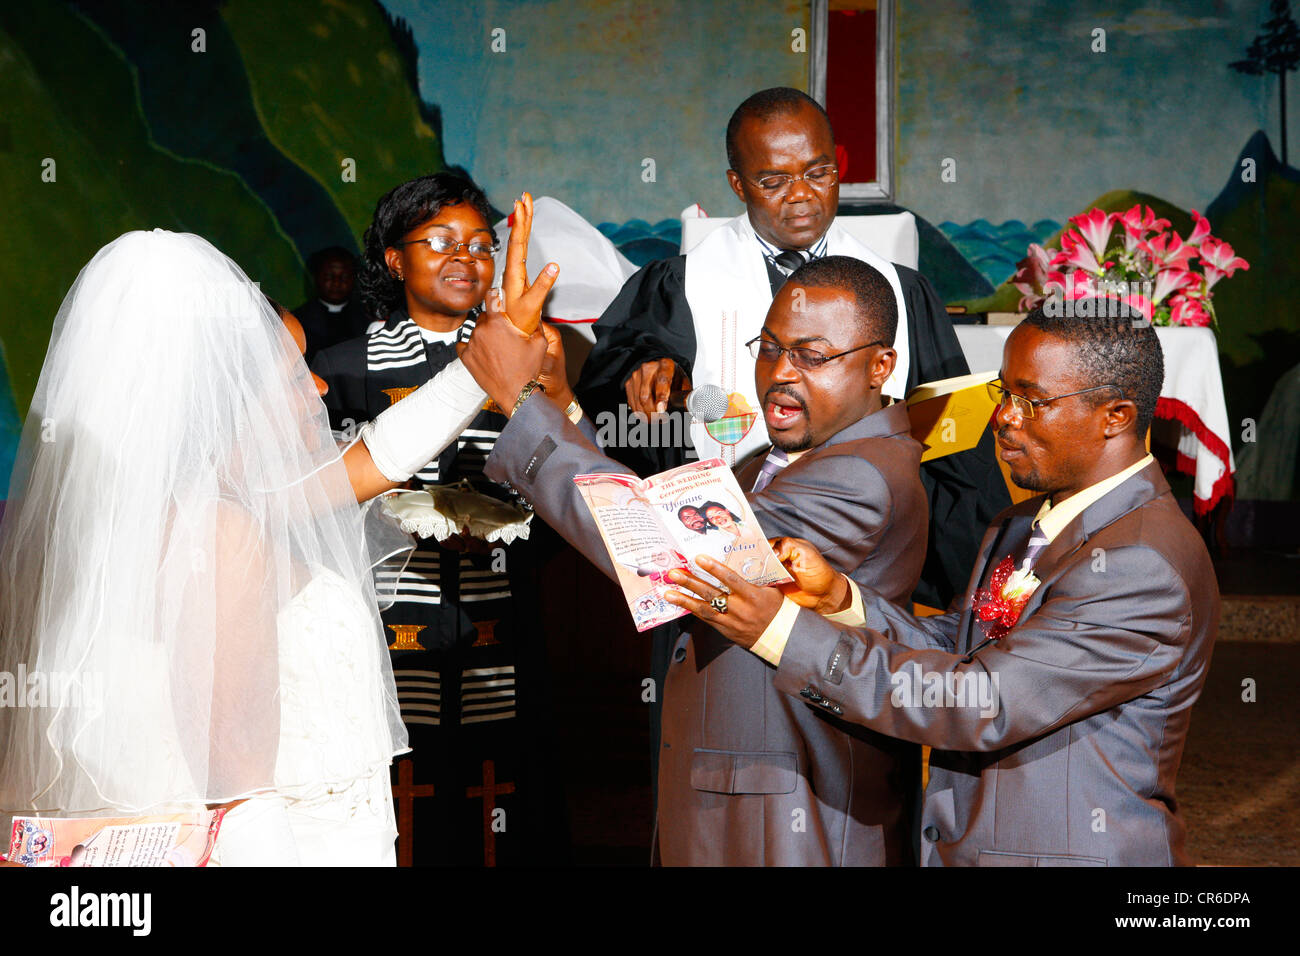 Bride and groom taking their wedding vows, Bamenda, Cameroon, Africa Stock Photo